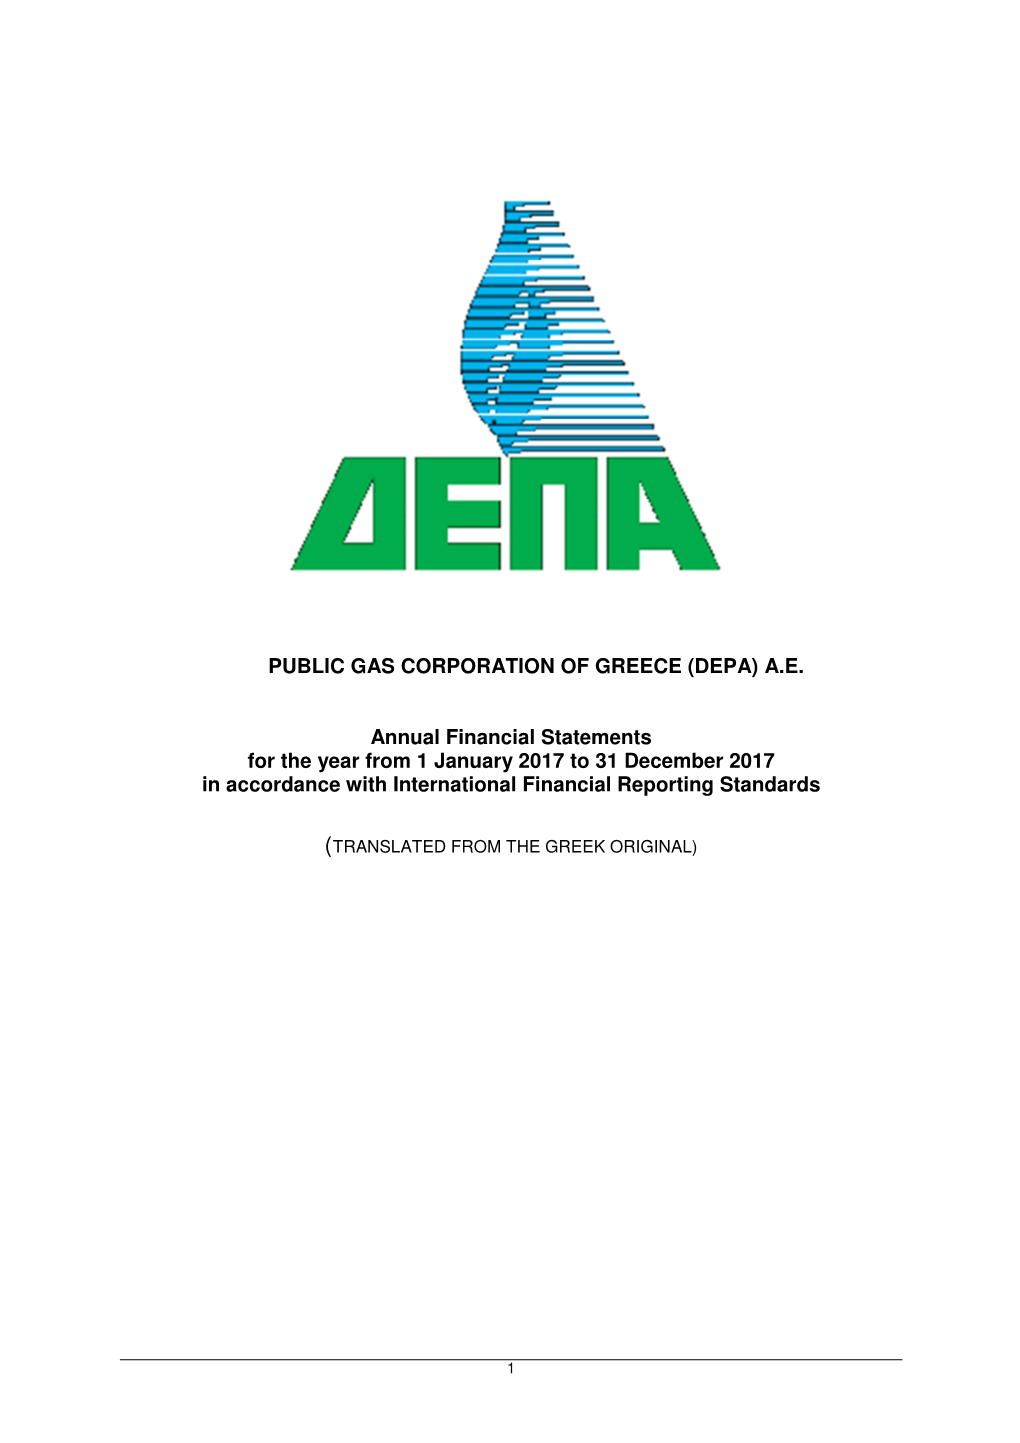 (DEPA) AE Annual Financial Statements for the Year from 1